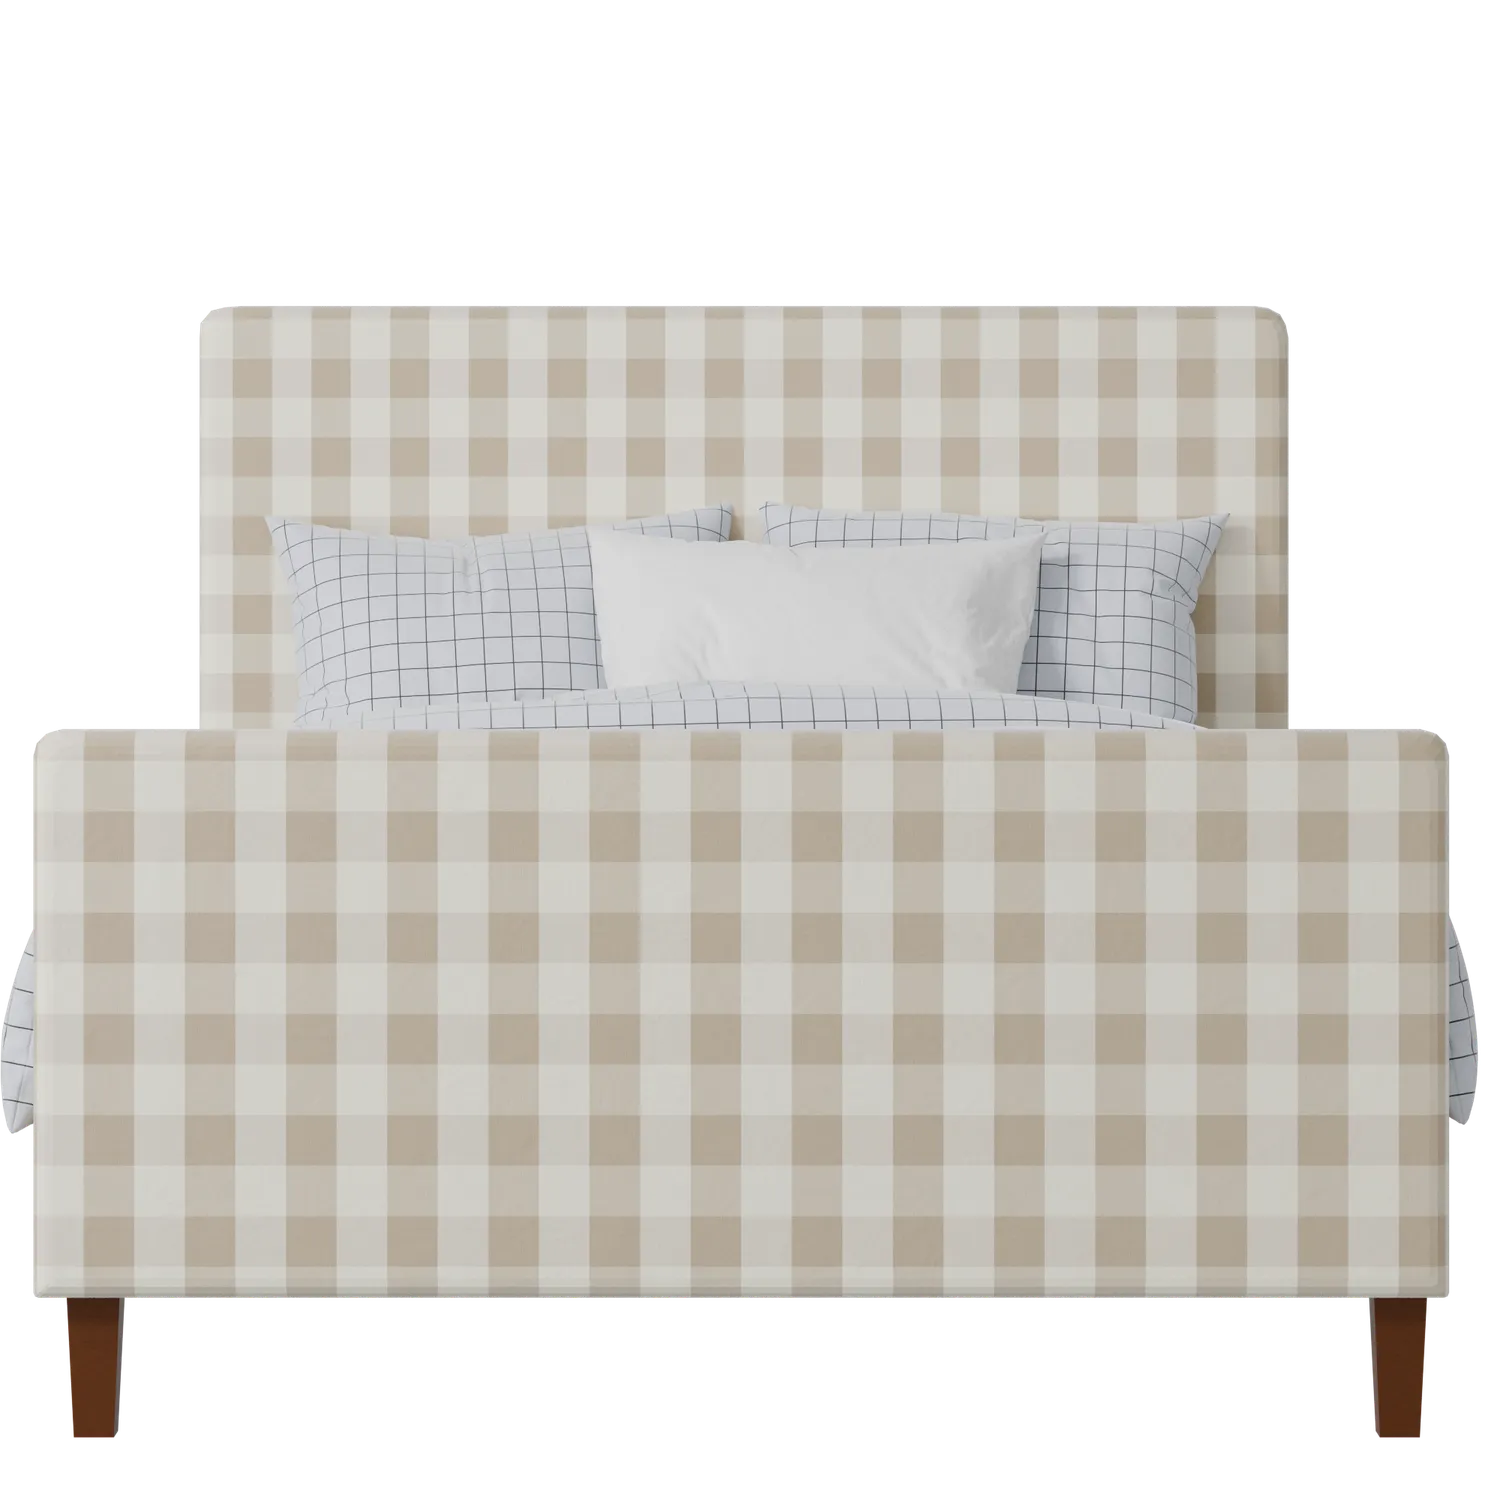 Porto upholstered bed in Romo Kemble Putty fabric